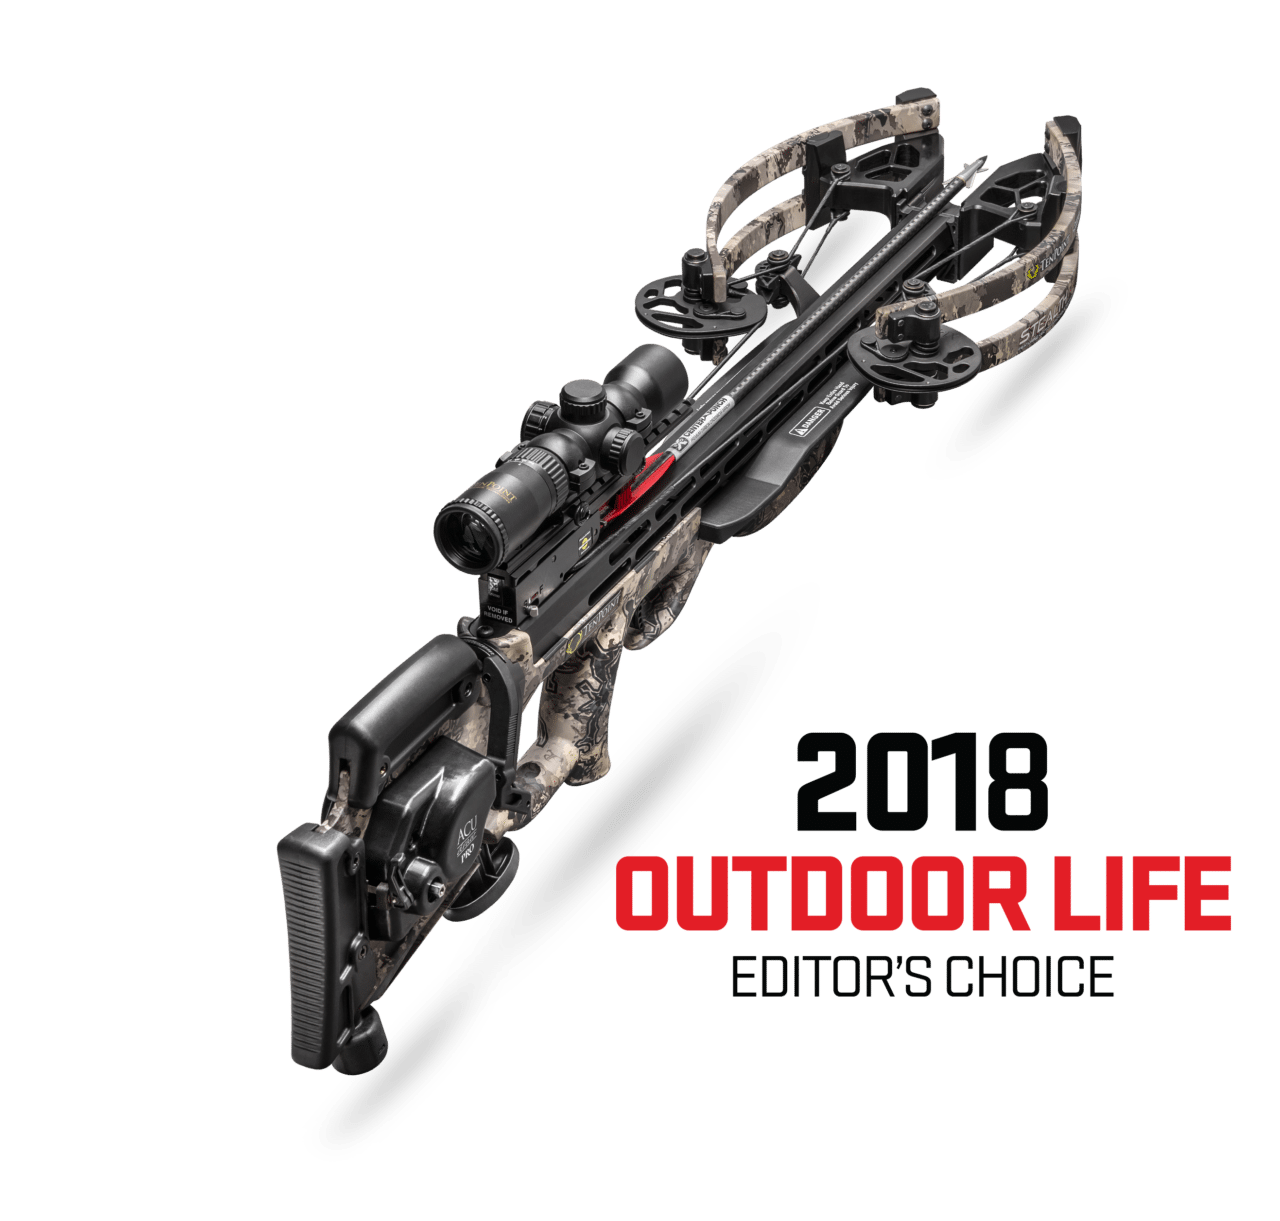 TenPoint Steath® NXT Tabbed Top Crossbow in Outdoor Life’s 2018 Crossbow Test